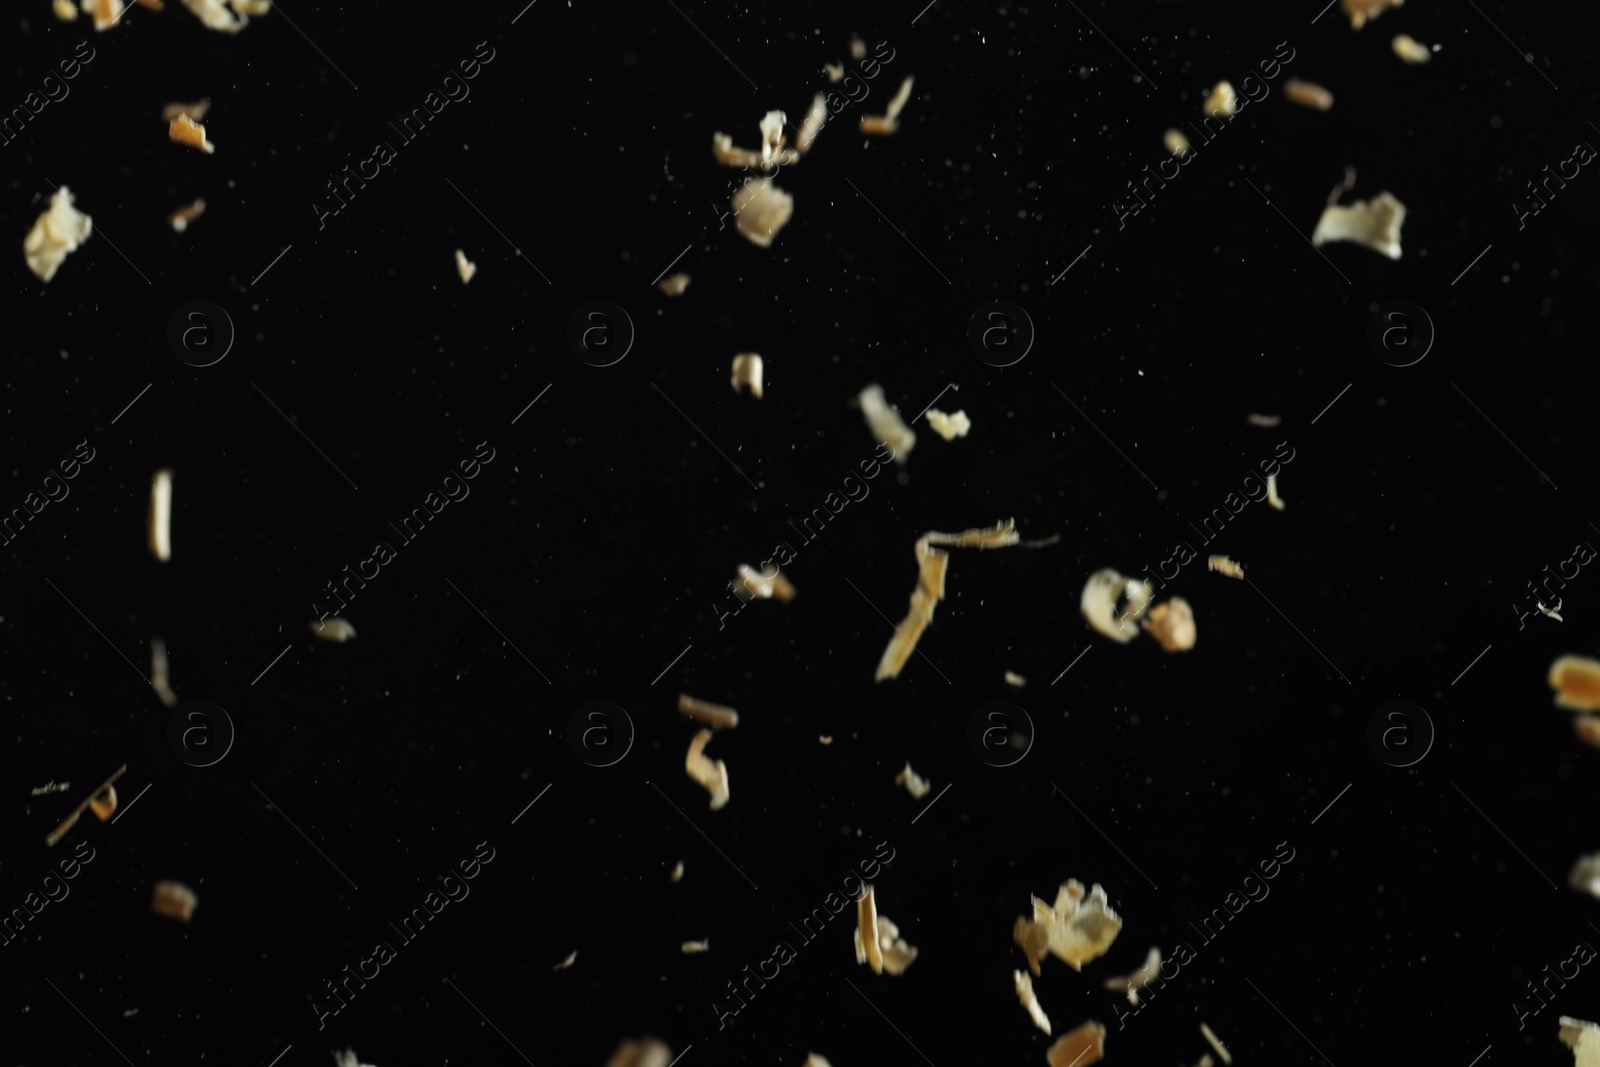 Photo of Dry natural sawdust falling on black background